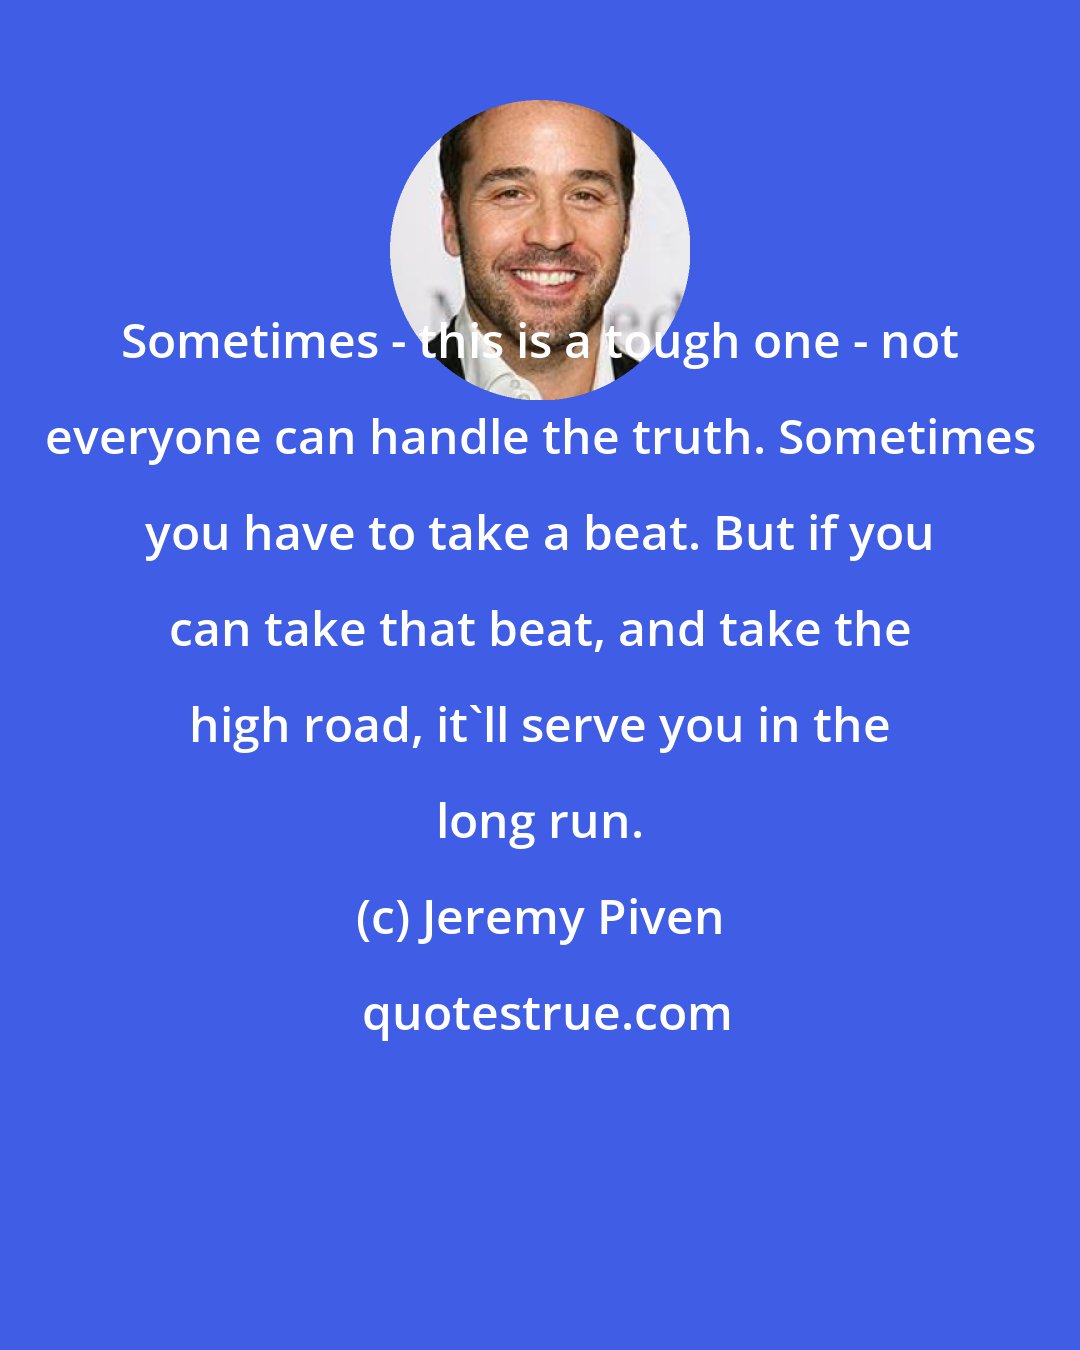 Jeremy Piven: Sometimes - this is a tough one - not everyone can handle the truth. Sometimes you have to take a beat. But if you can take that beat, and take the high road, it'll serve you in the long run.